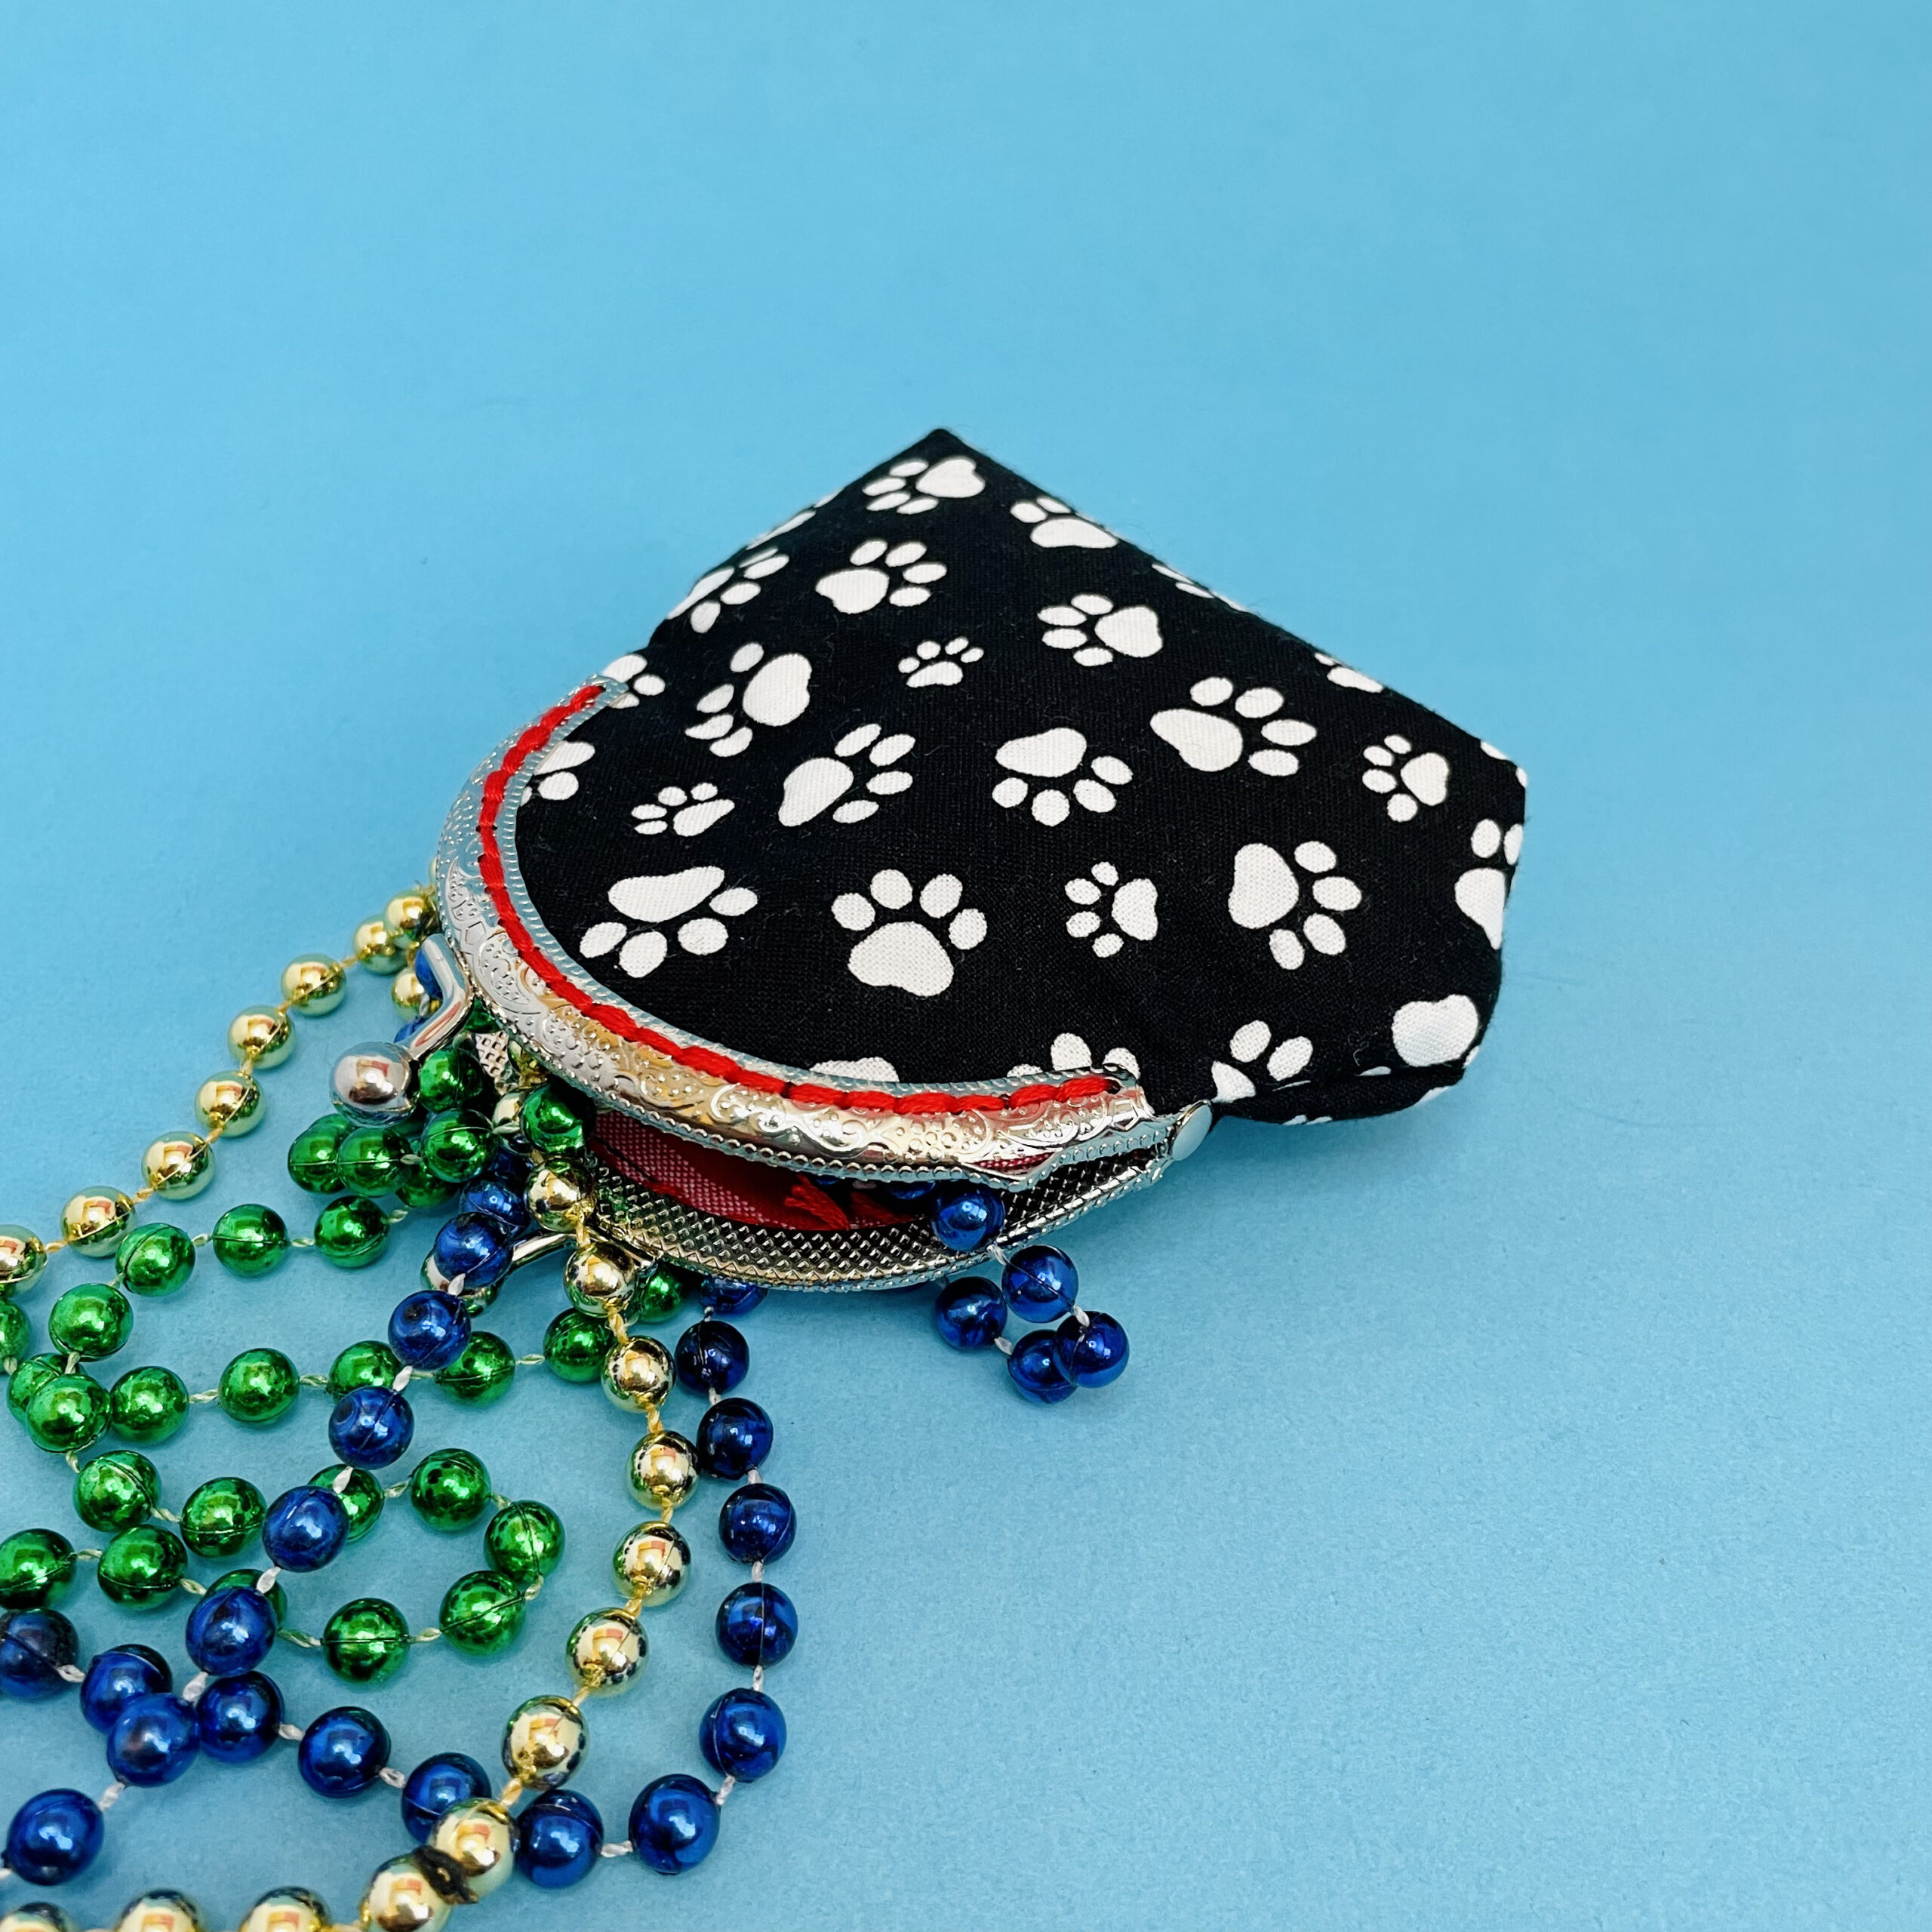 Coin Purse. Black and white dog paw prints.